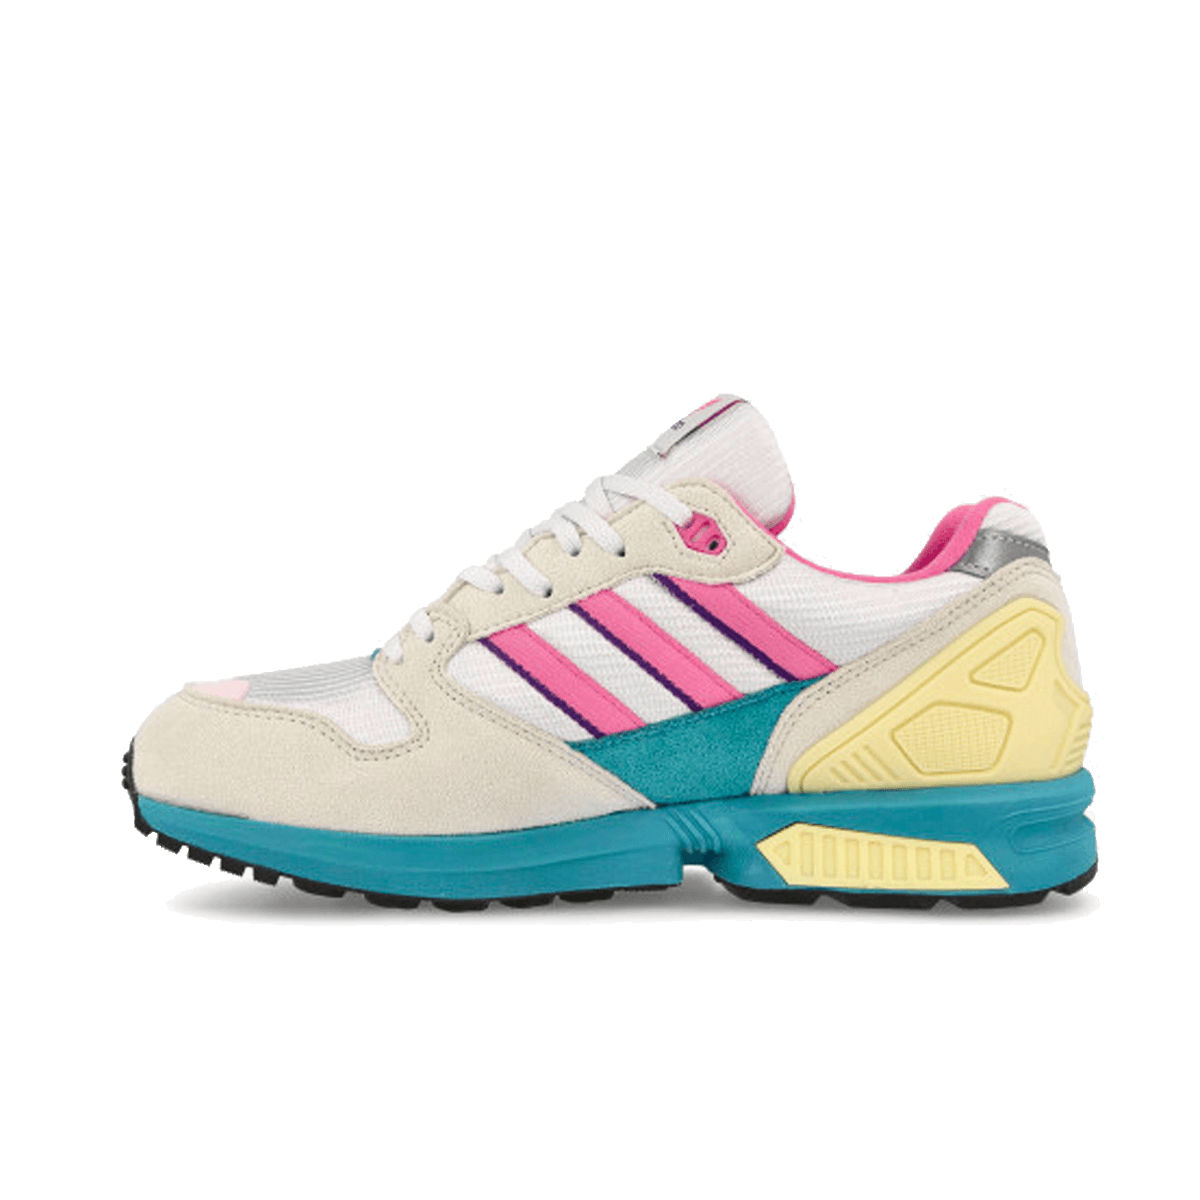 adidas ZX 750 'Black Blue Red' | FZ5894 | The Drop Date